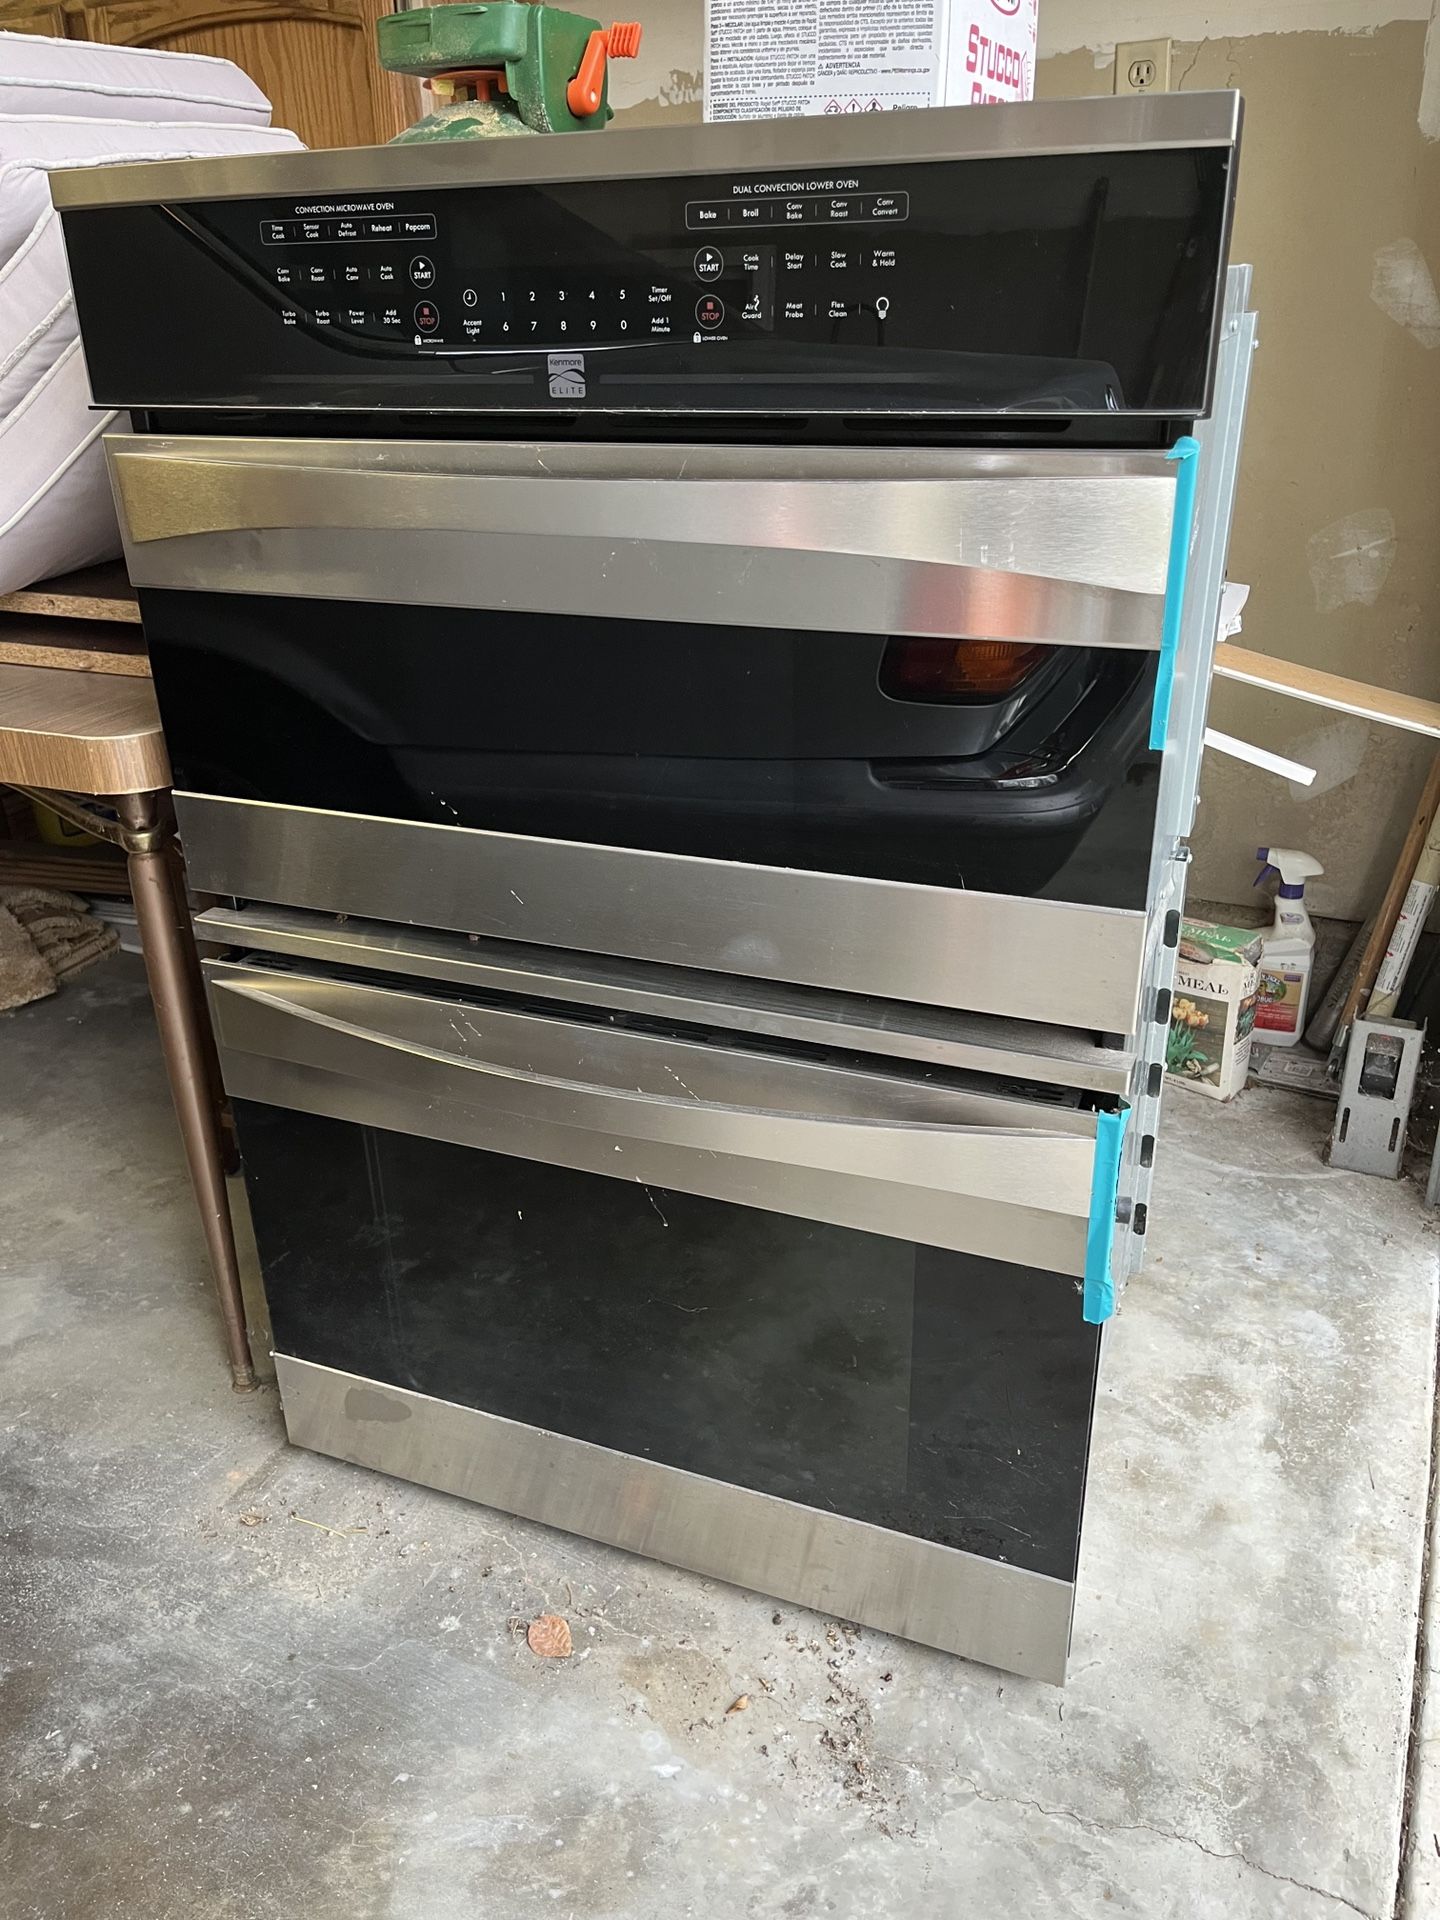 Kenmore Convection Oven